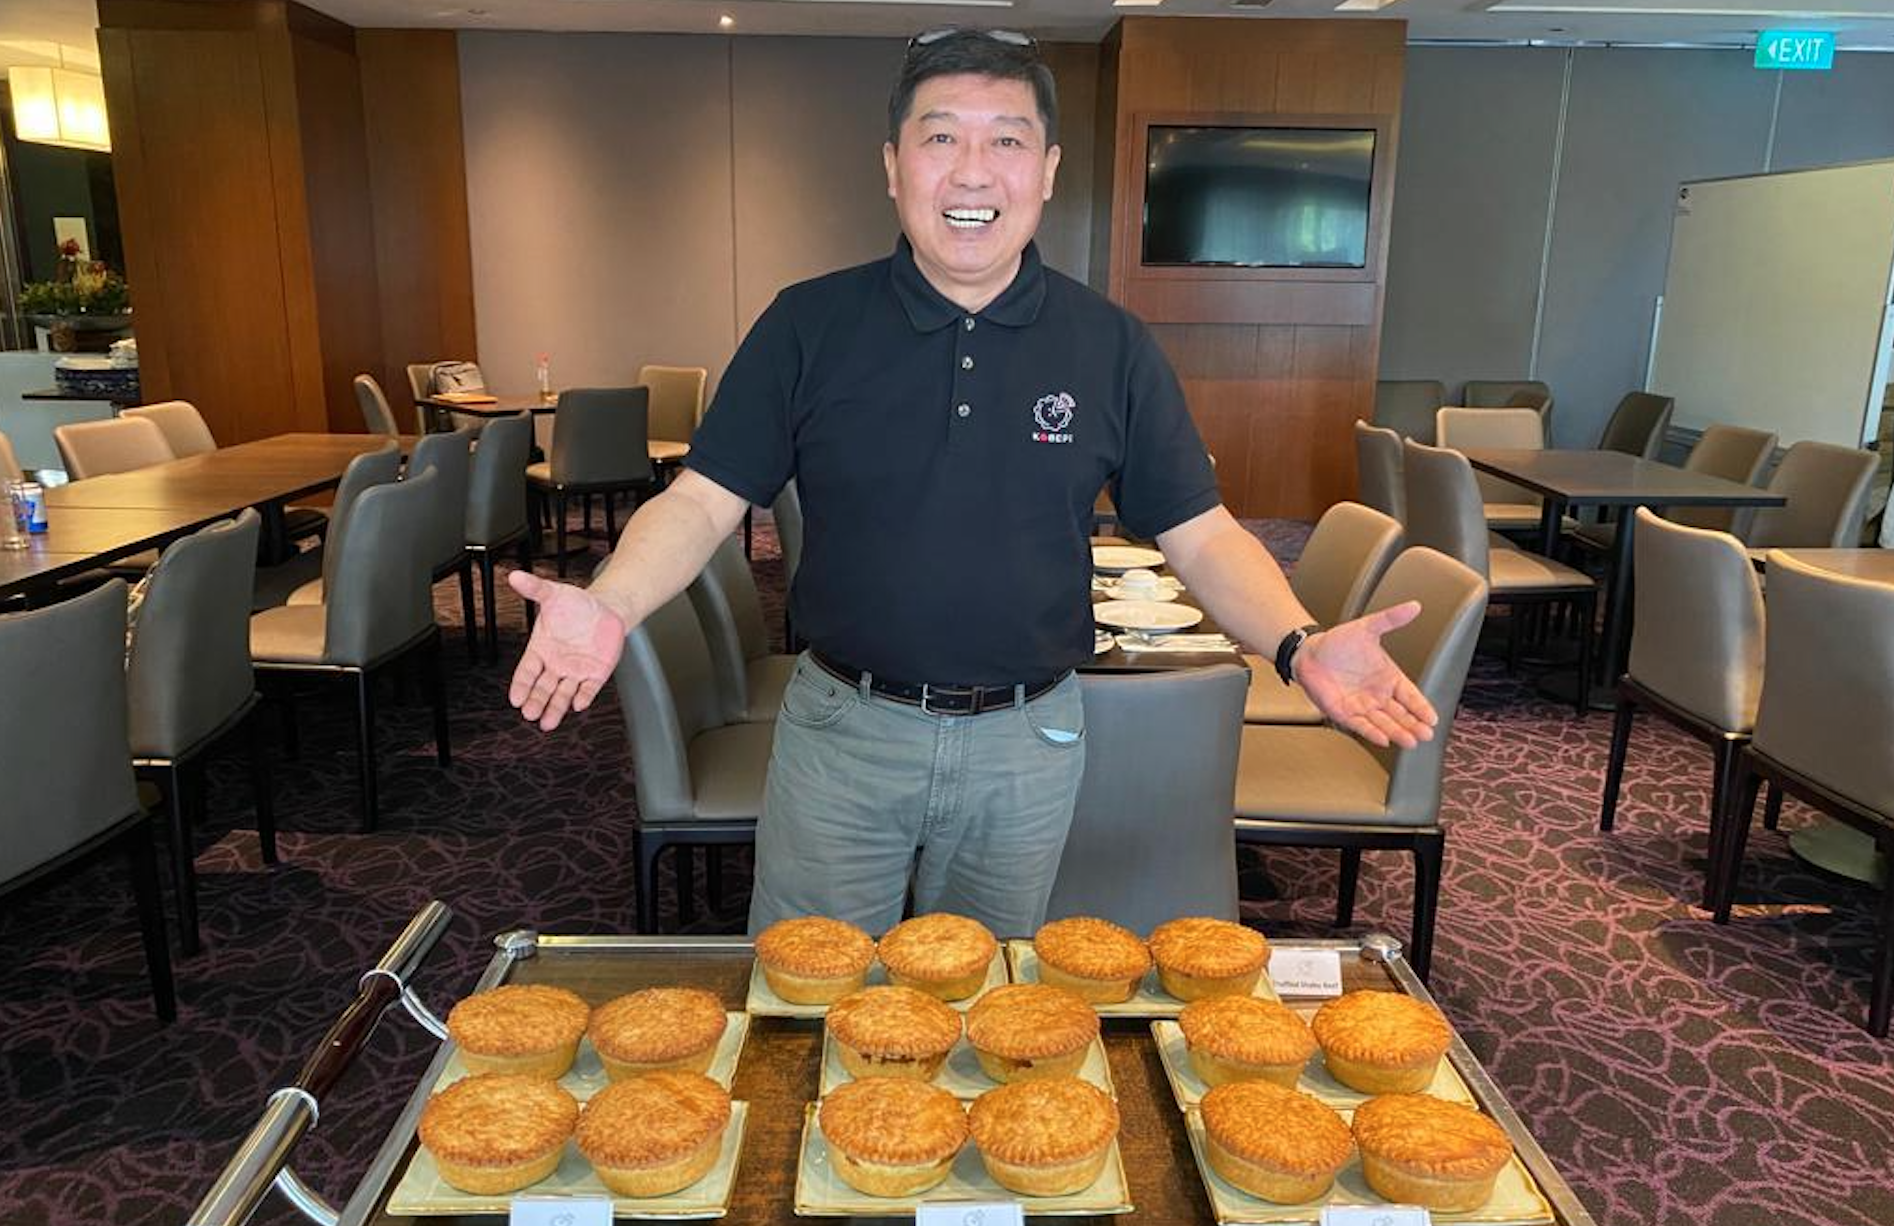 After Oishi Pizza’s Demise, This 62-Year-Old Founder Now Has His Fingers in Japanese Pies